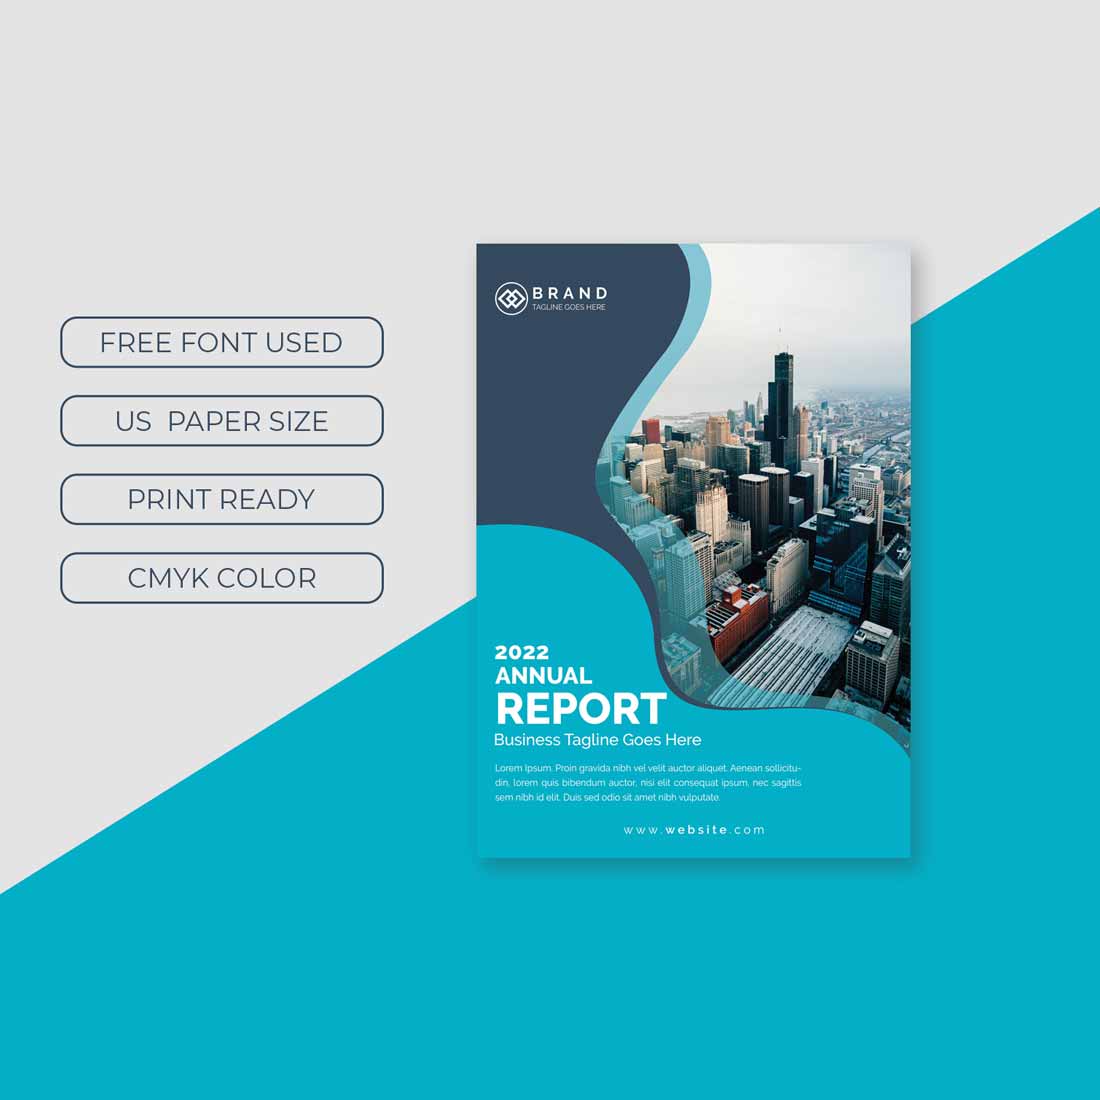 Annual Report Cover Template cover image.